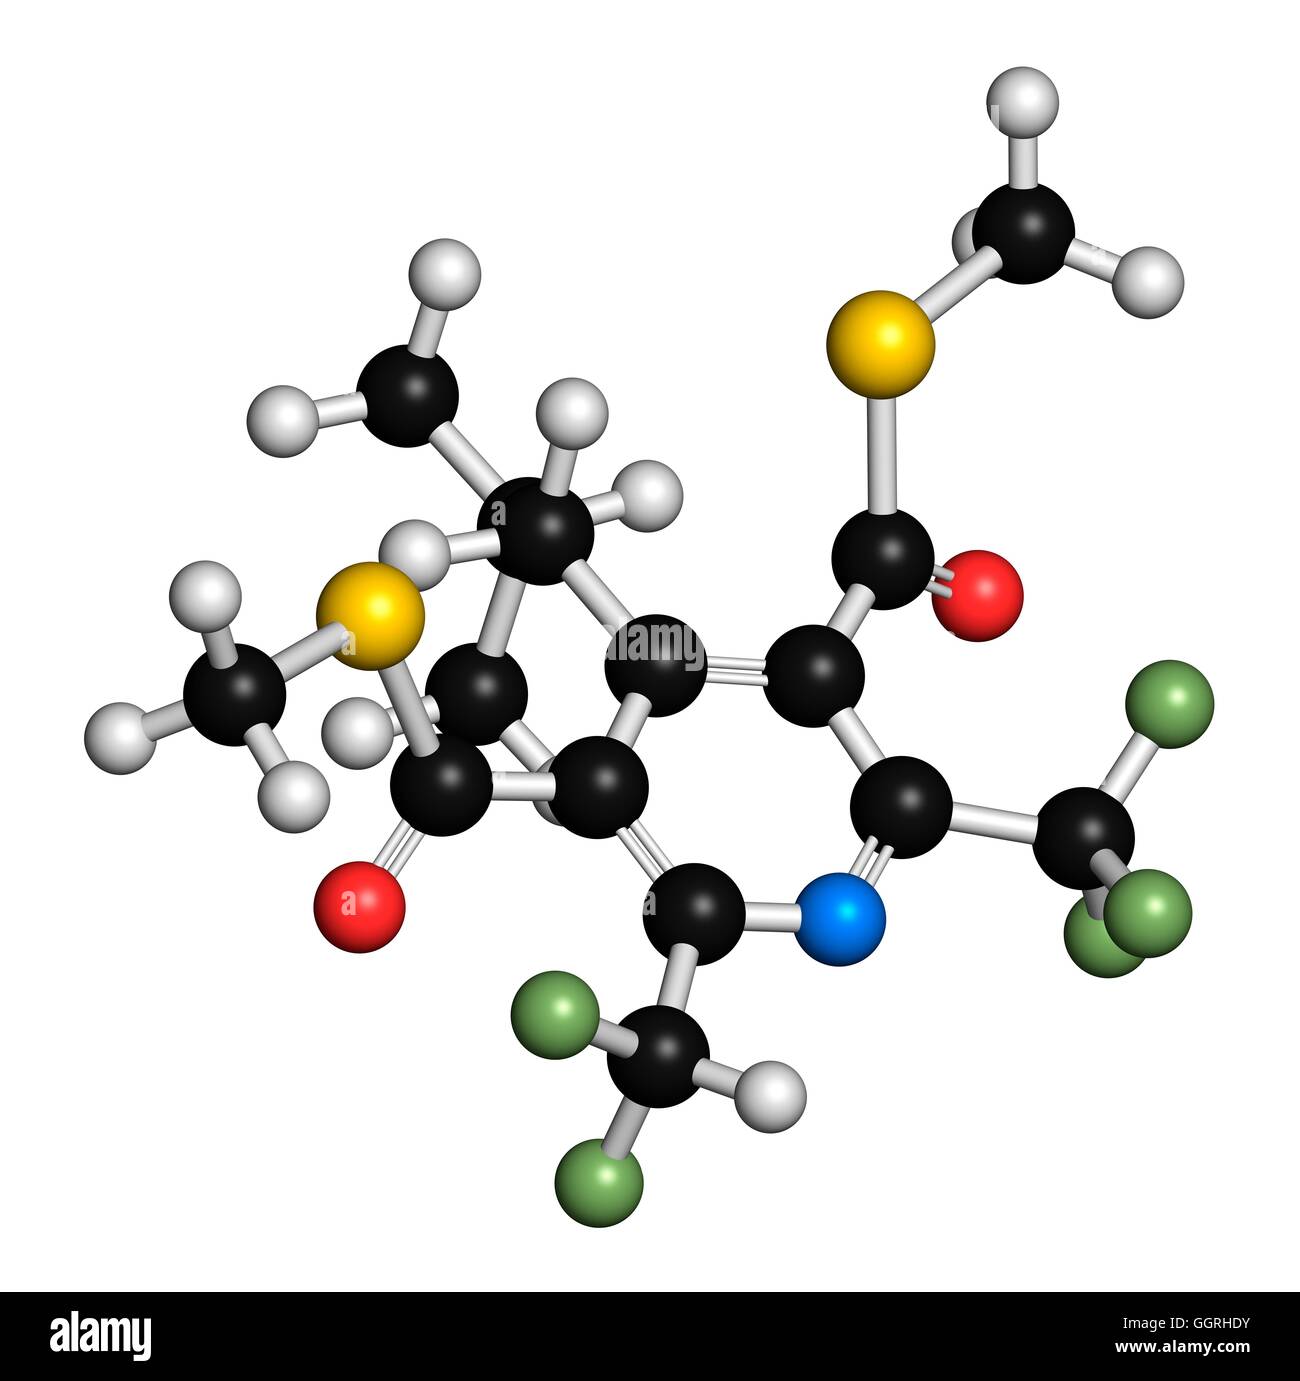 Dithiopyr preemergent herbicide, molecular model. Atoms are represented as spheres with conventional colour coding: hydrogen (white), carbon (black), oxygen (red), nitrogen (blue), sulphur (yellow), fluorine (light green). Illustration. Stock Photo